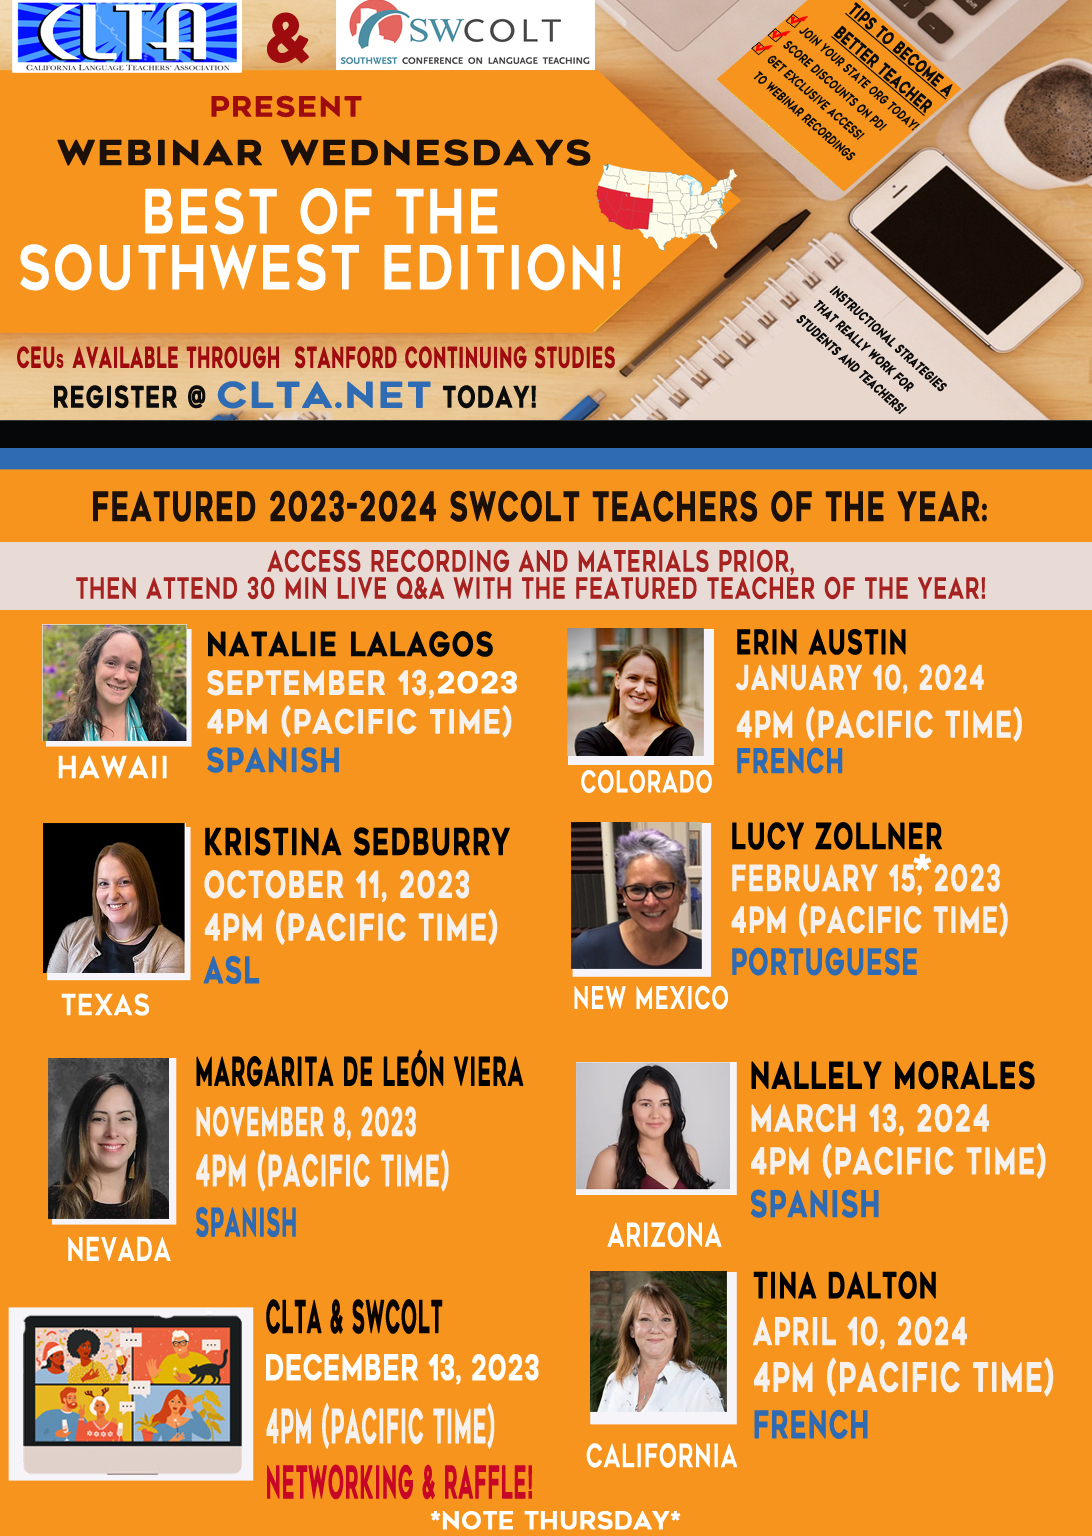 Best of the Southwest 2023-24 Full Presenter Layout, dates and titles